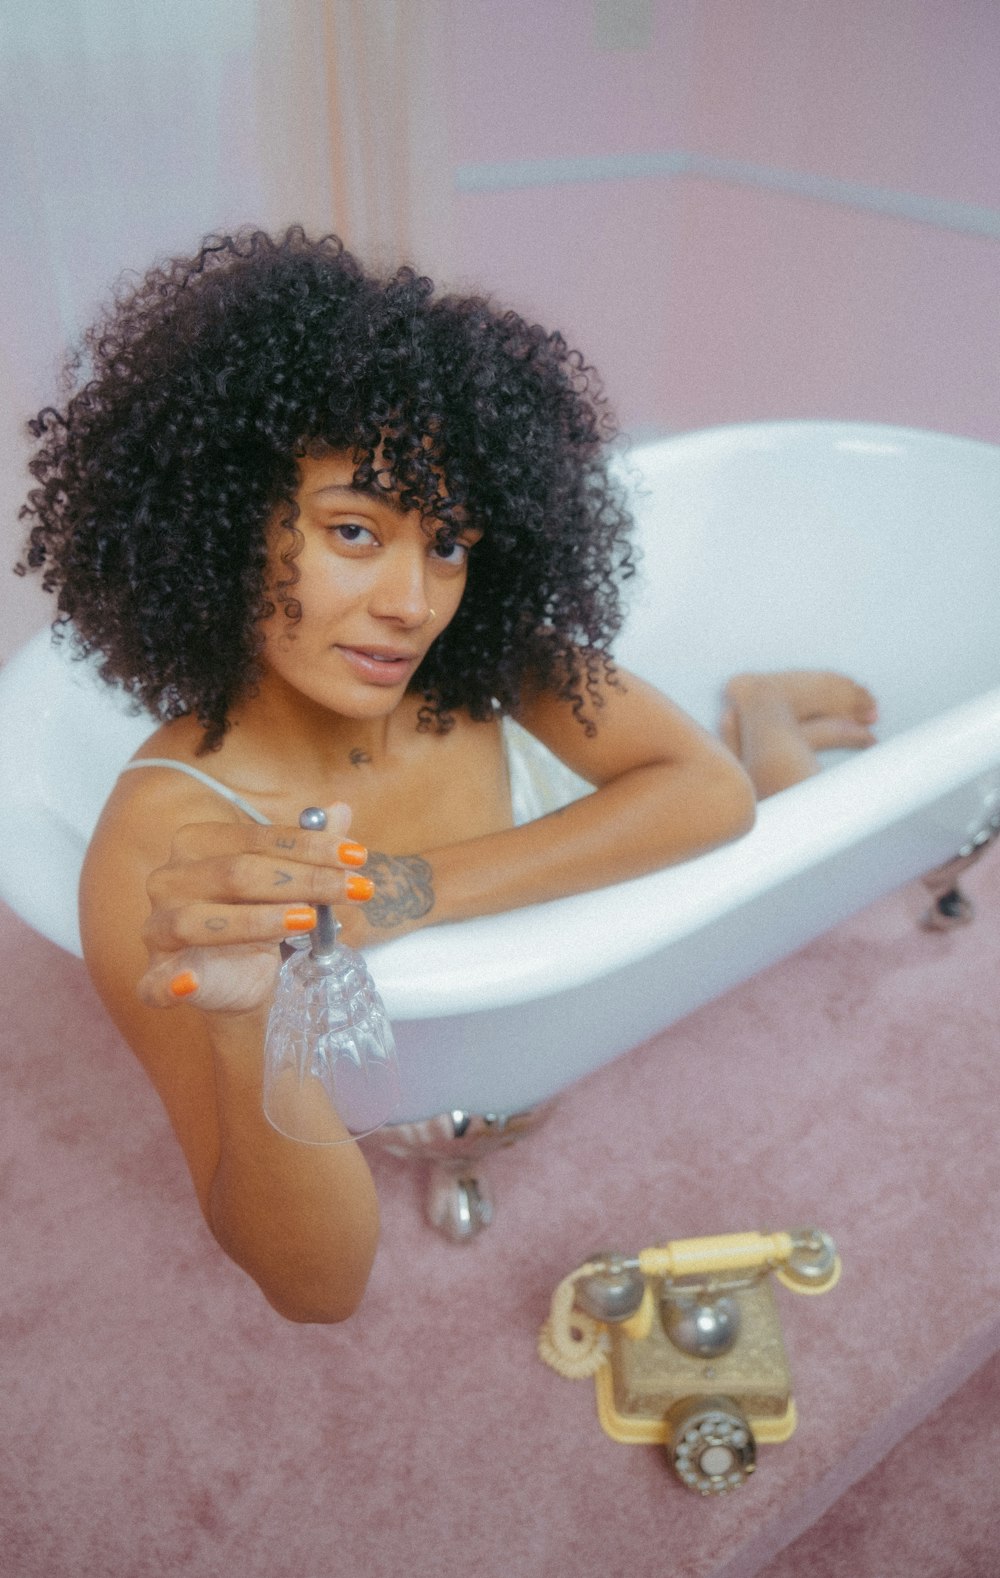 a woman sitting in a bathtub with a phone next to her